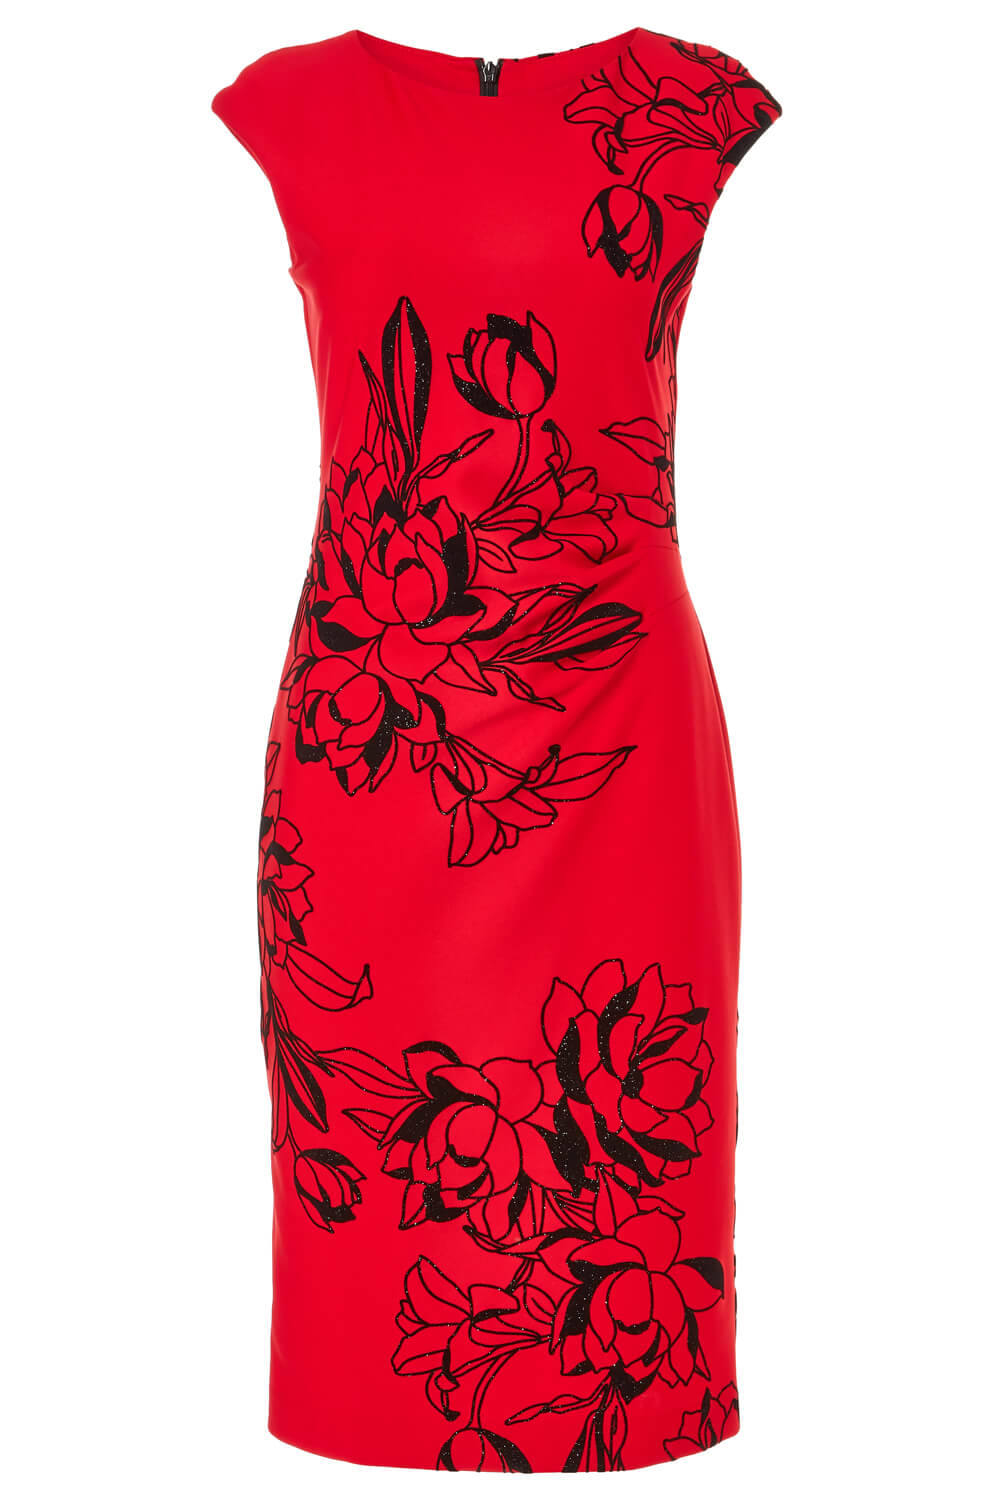 Red Floral Print Fitted Scuba Dress, Image 5 of 5